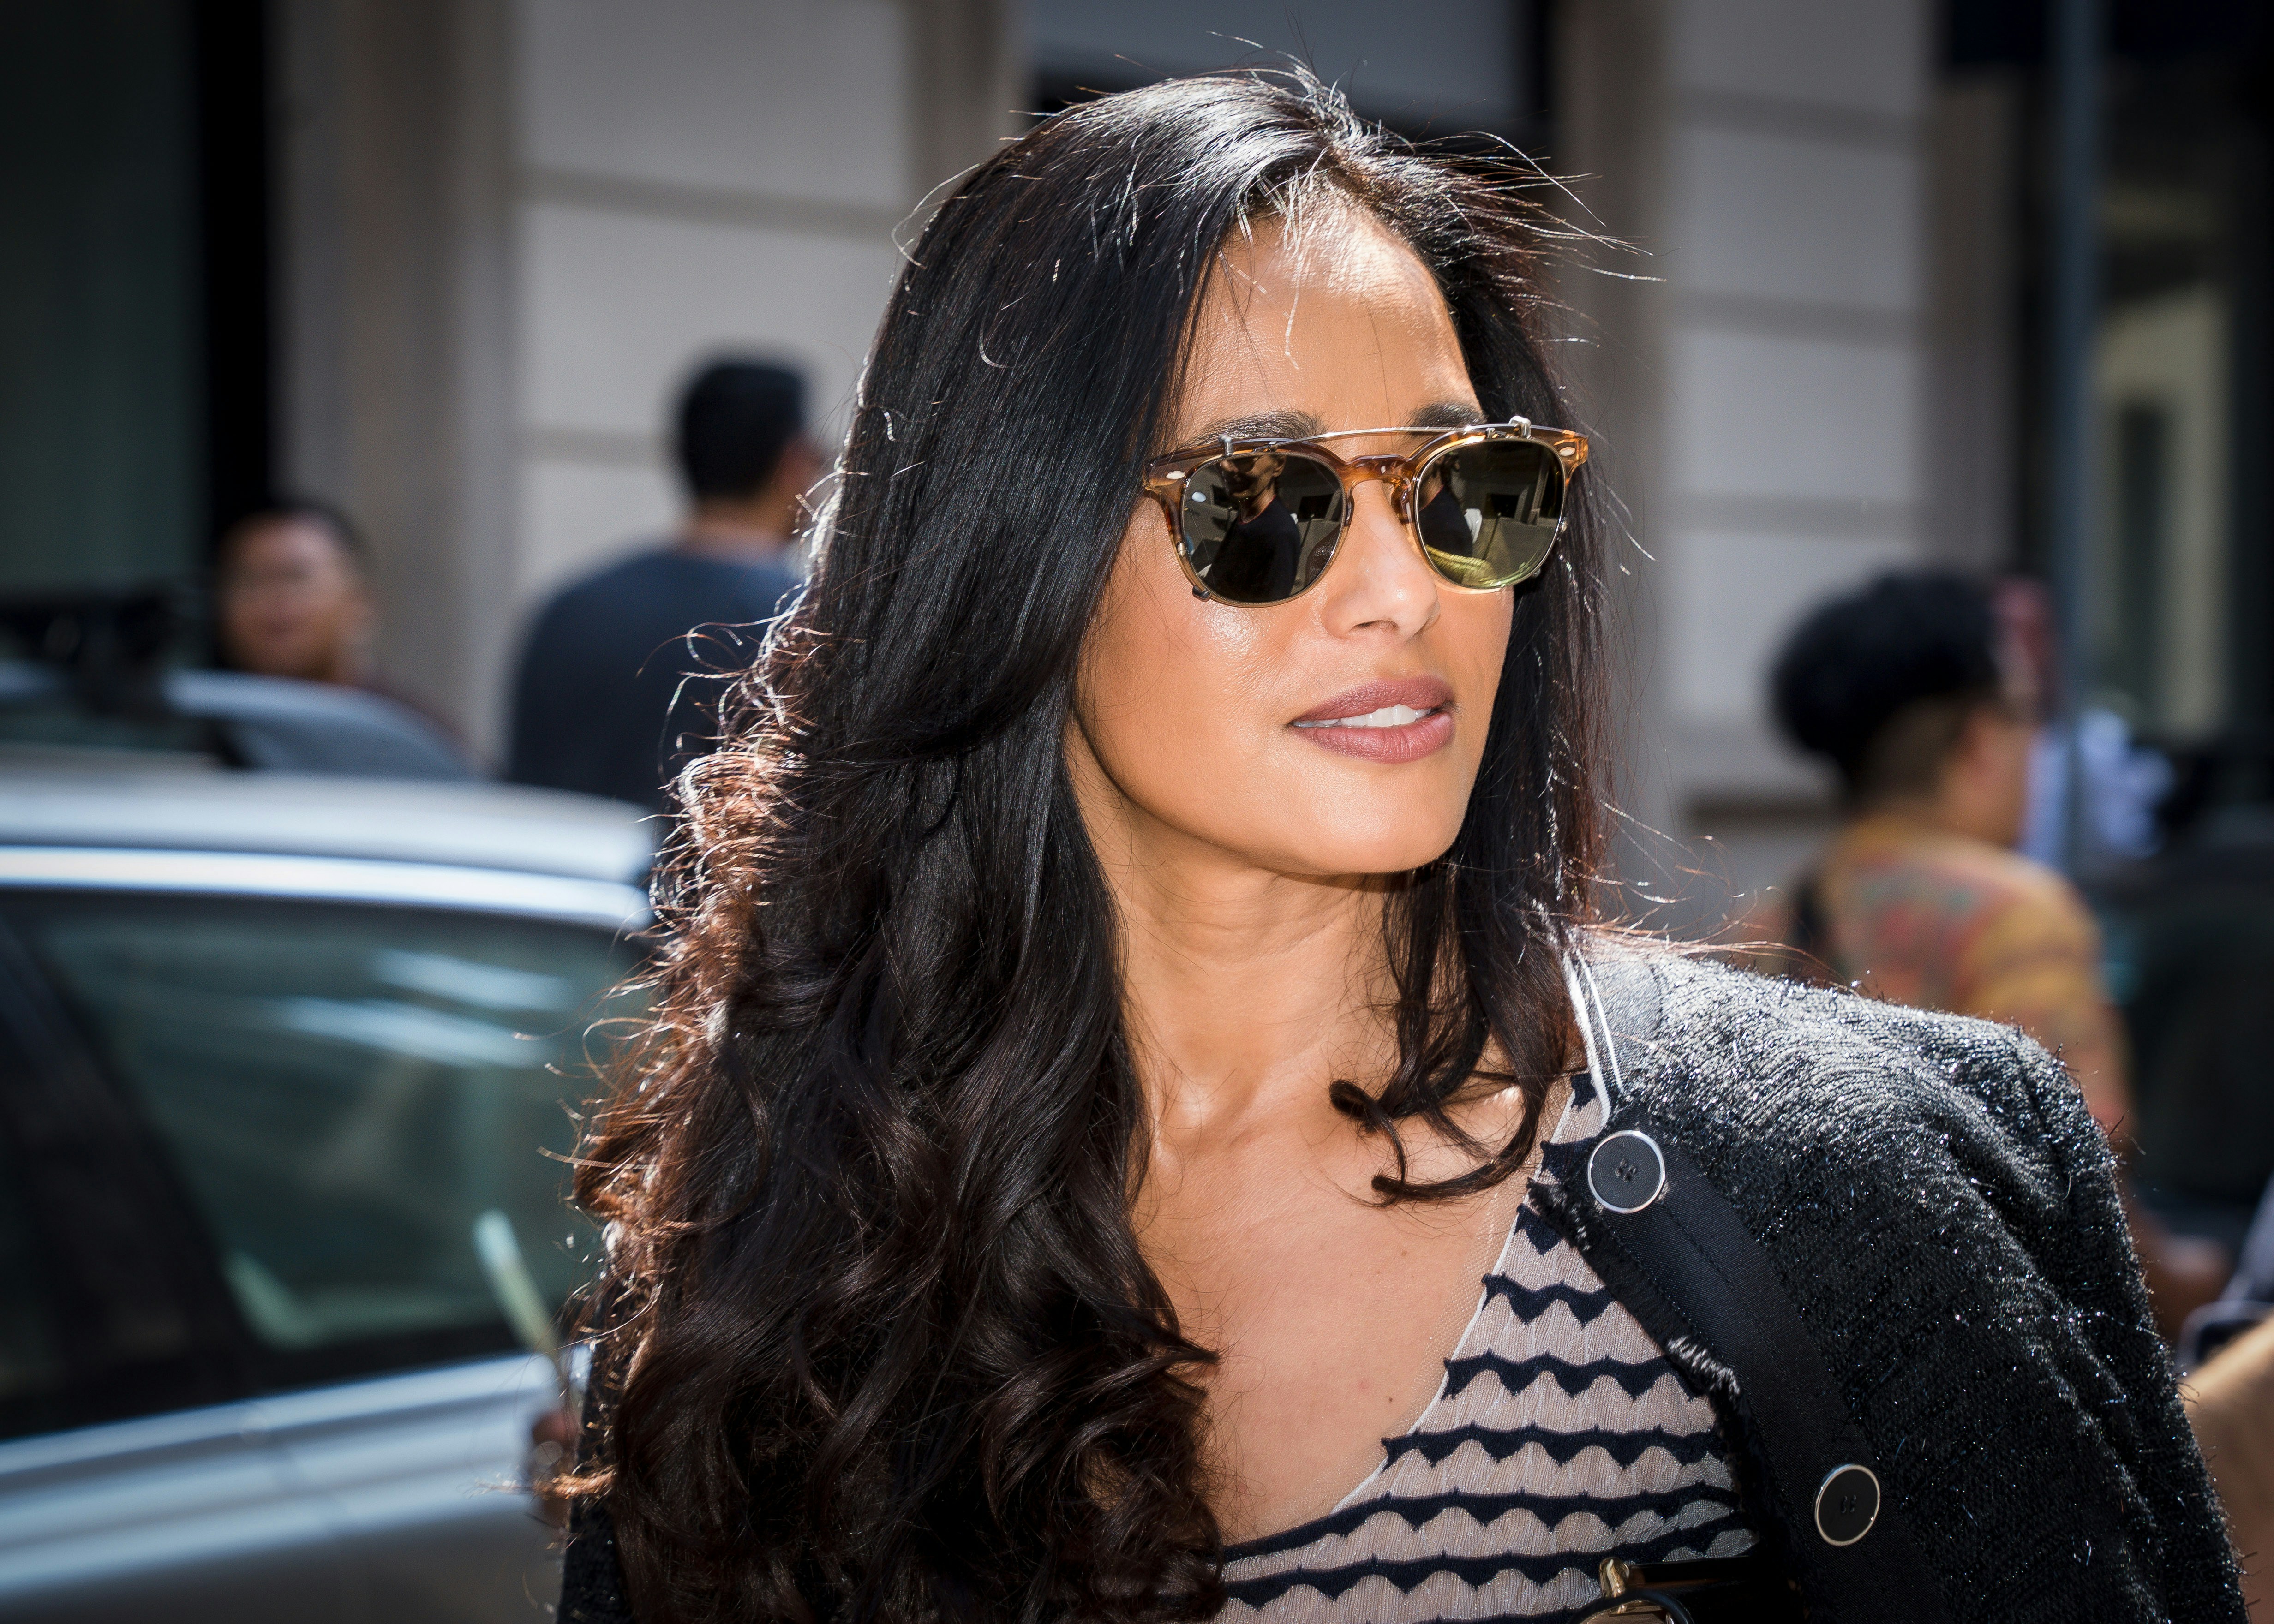 Palestinian foreign policy analyst, journalist, novelist and screenwriter Rula Jebreal guest at the Giorgio Armani fashion show of Milan Fashion Week Men's Collection Spring Summer 2023. Milan (Italy), June 20th, 2022 (Photo by Marco Piraccini/Archivio Marco Piraccini/Mondadori Portfolio via Getty Images)